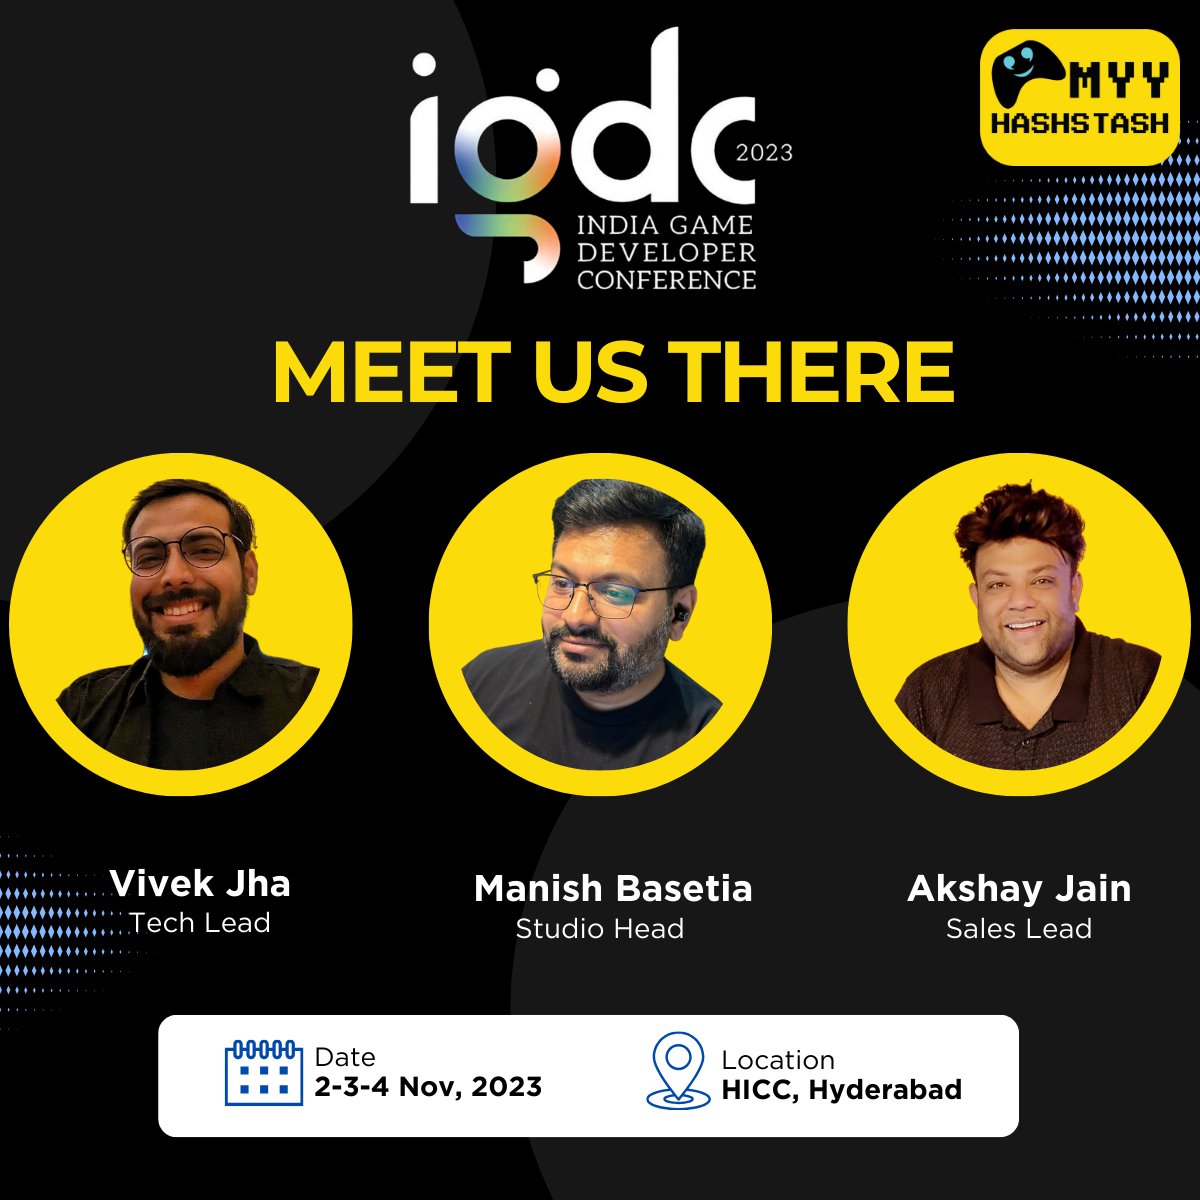 Team @MyyHashstash is coming for the @theindiagdc ! 🙌 Save the date and be part of India's biggest and oldest game developer conference. For all the event details, visit the IGDC website: indiagdc.com See you there! #IGDC2023 #gamesindustry